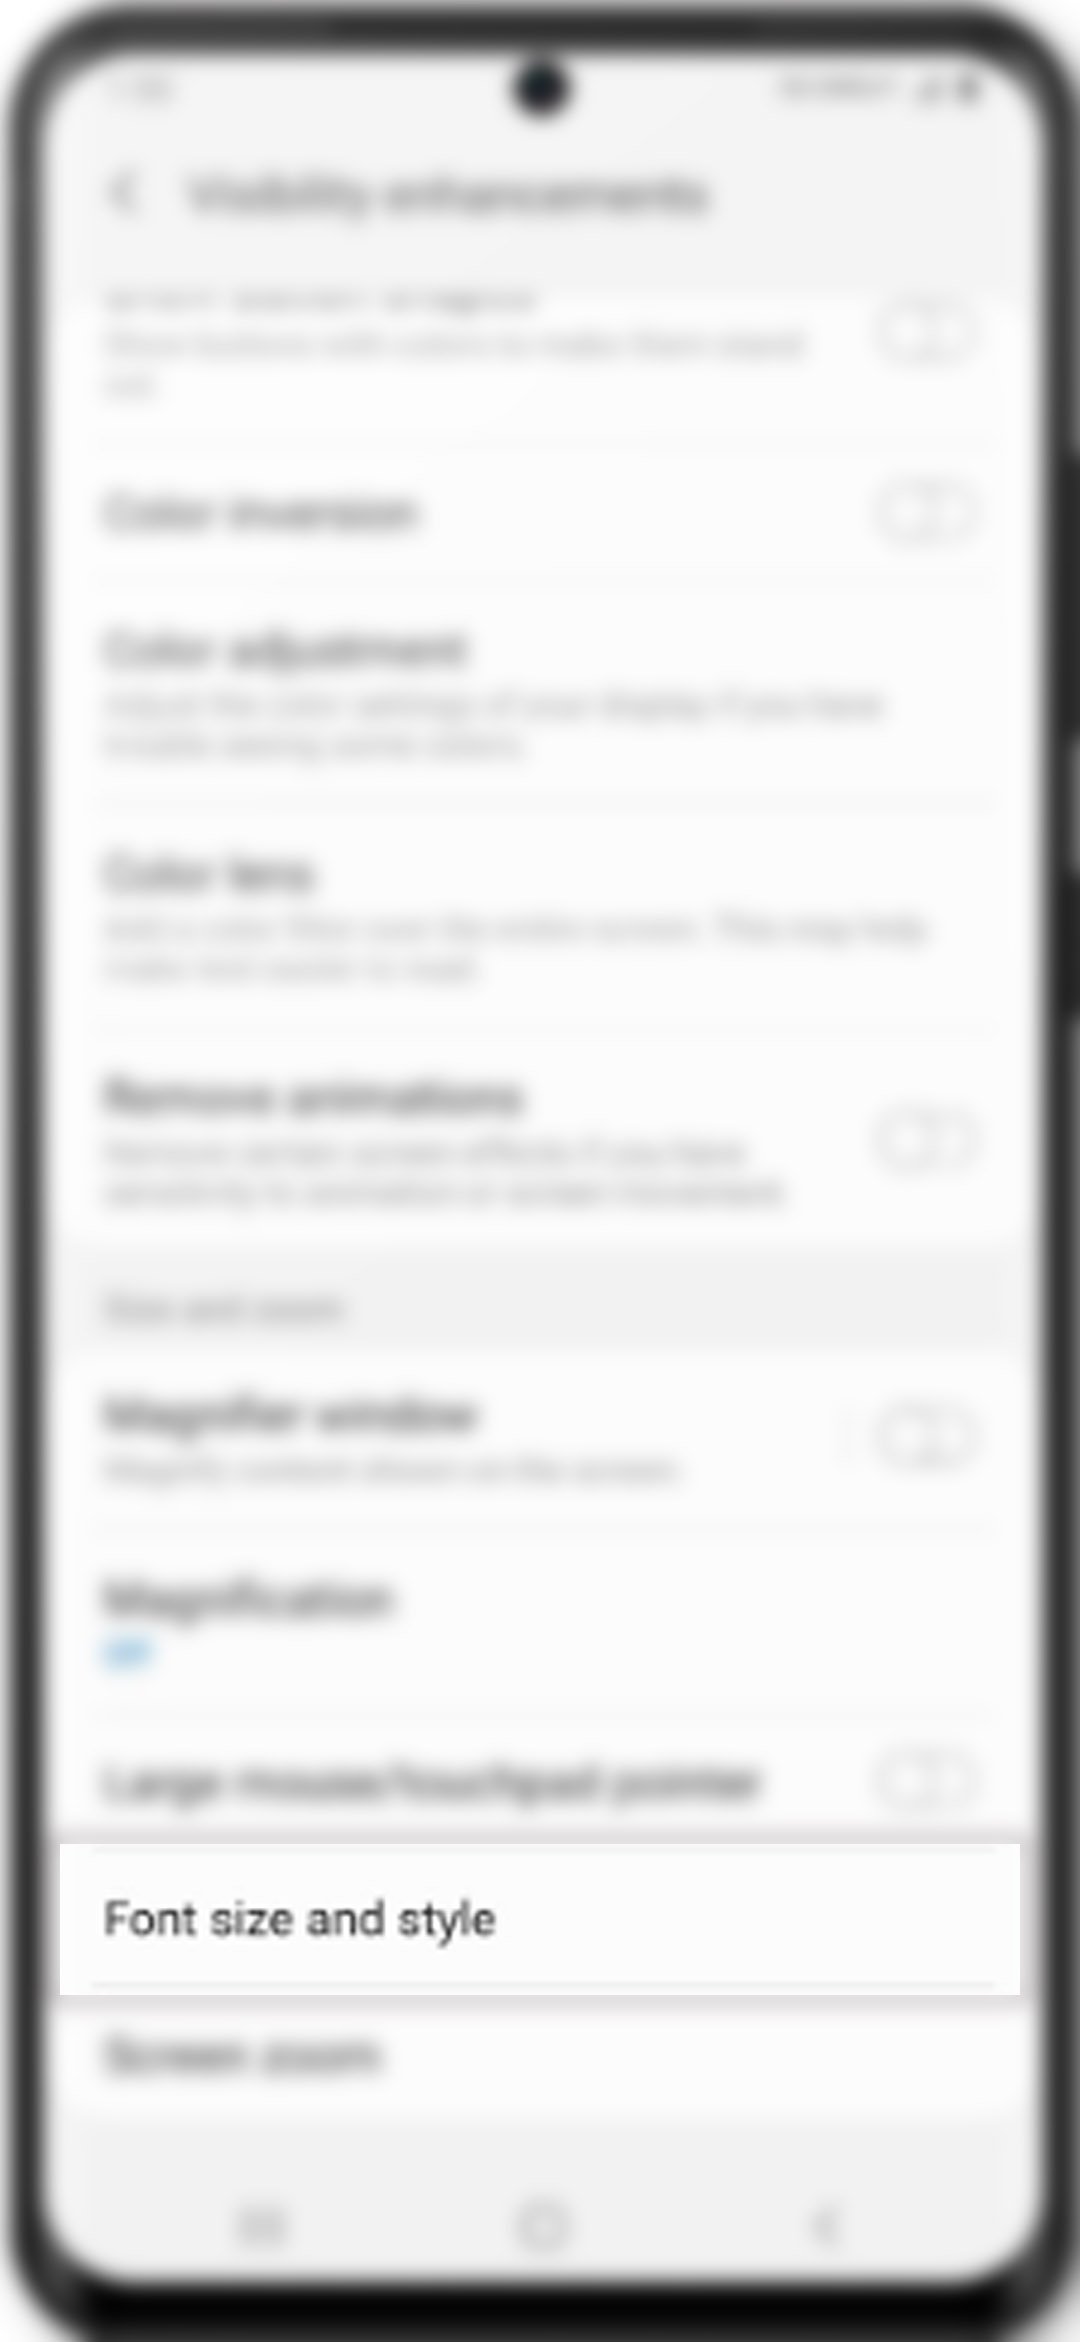 change galaxy s20 font size and style - font size and style menu